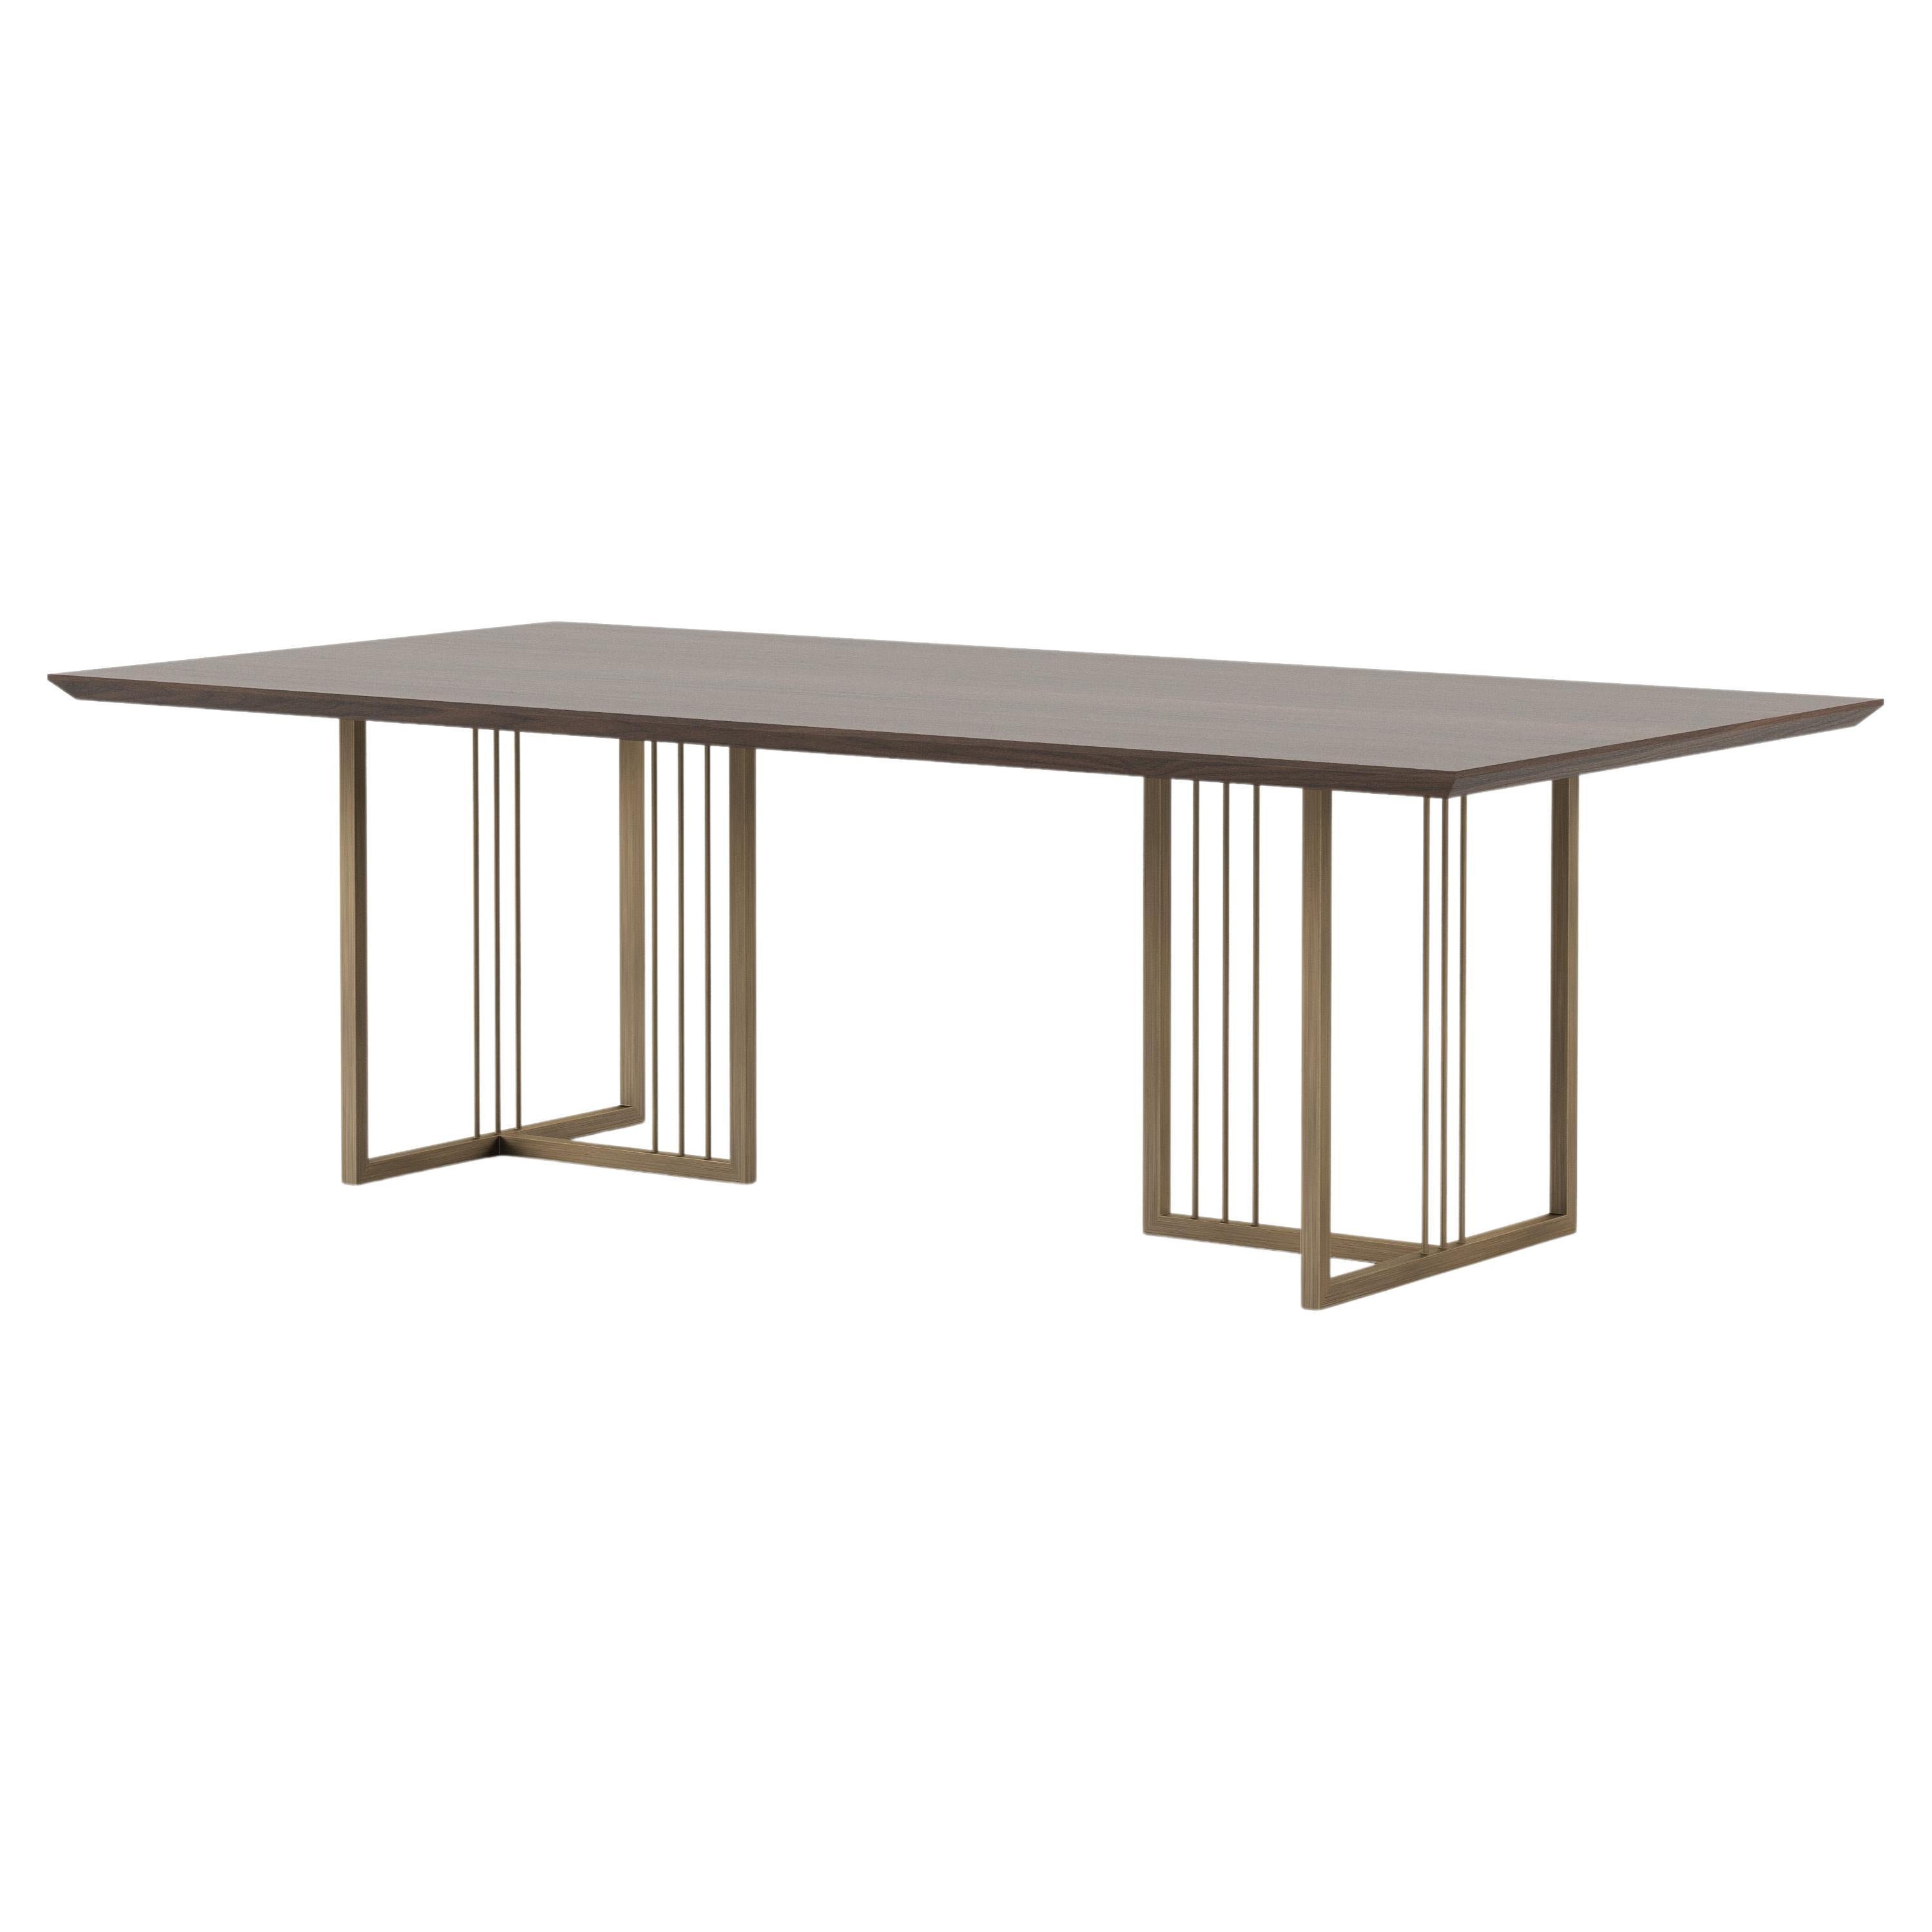 Scandinavian Modern Porto Dining Table Made with Walnut and Iron by Stylish Club For Sale